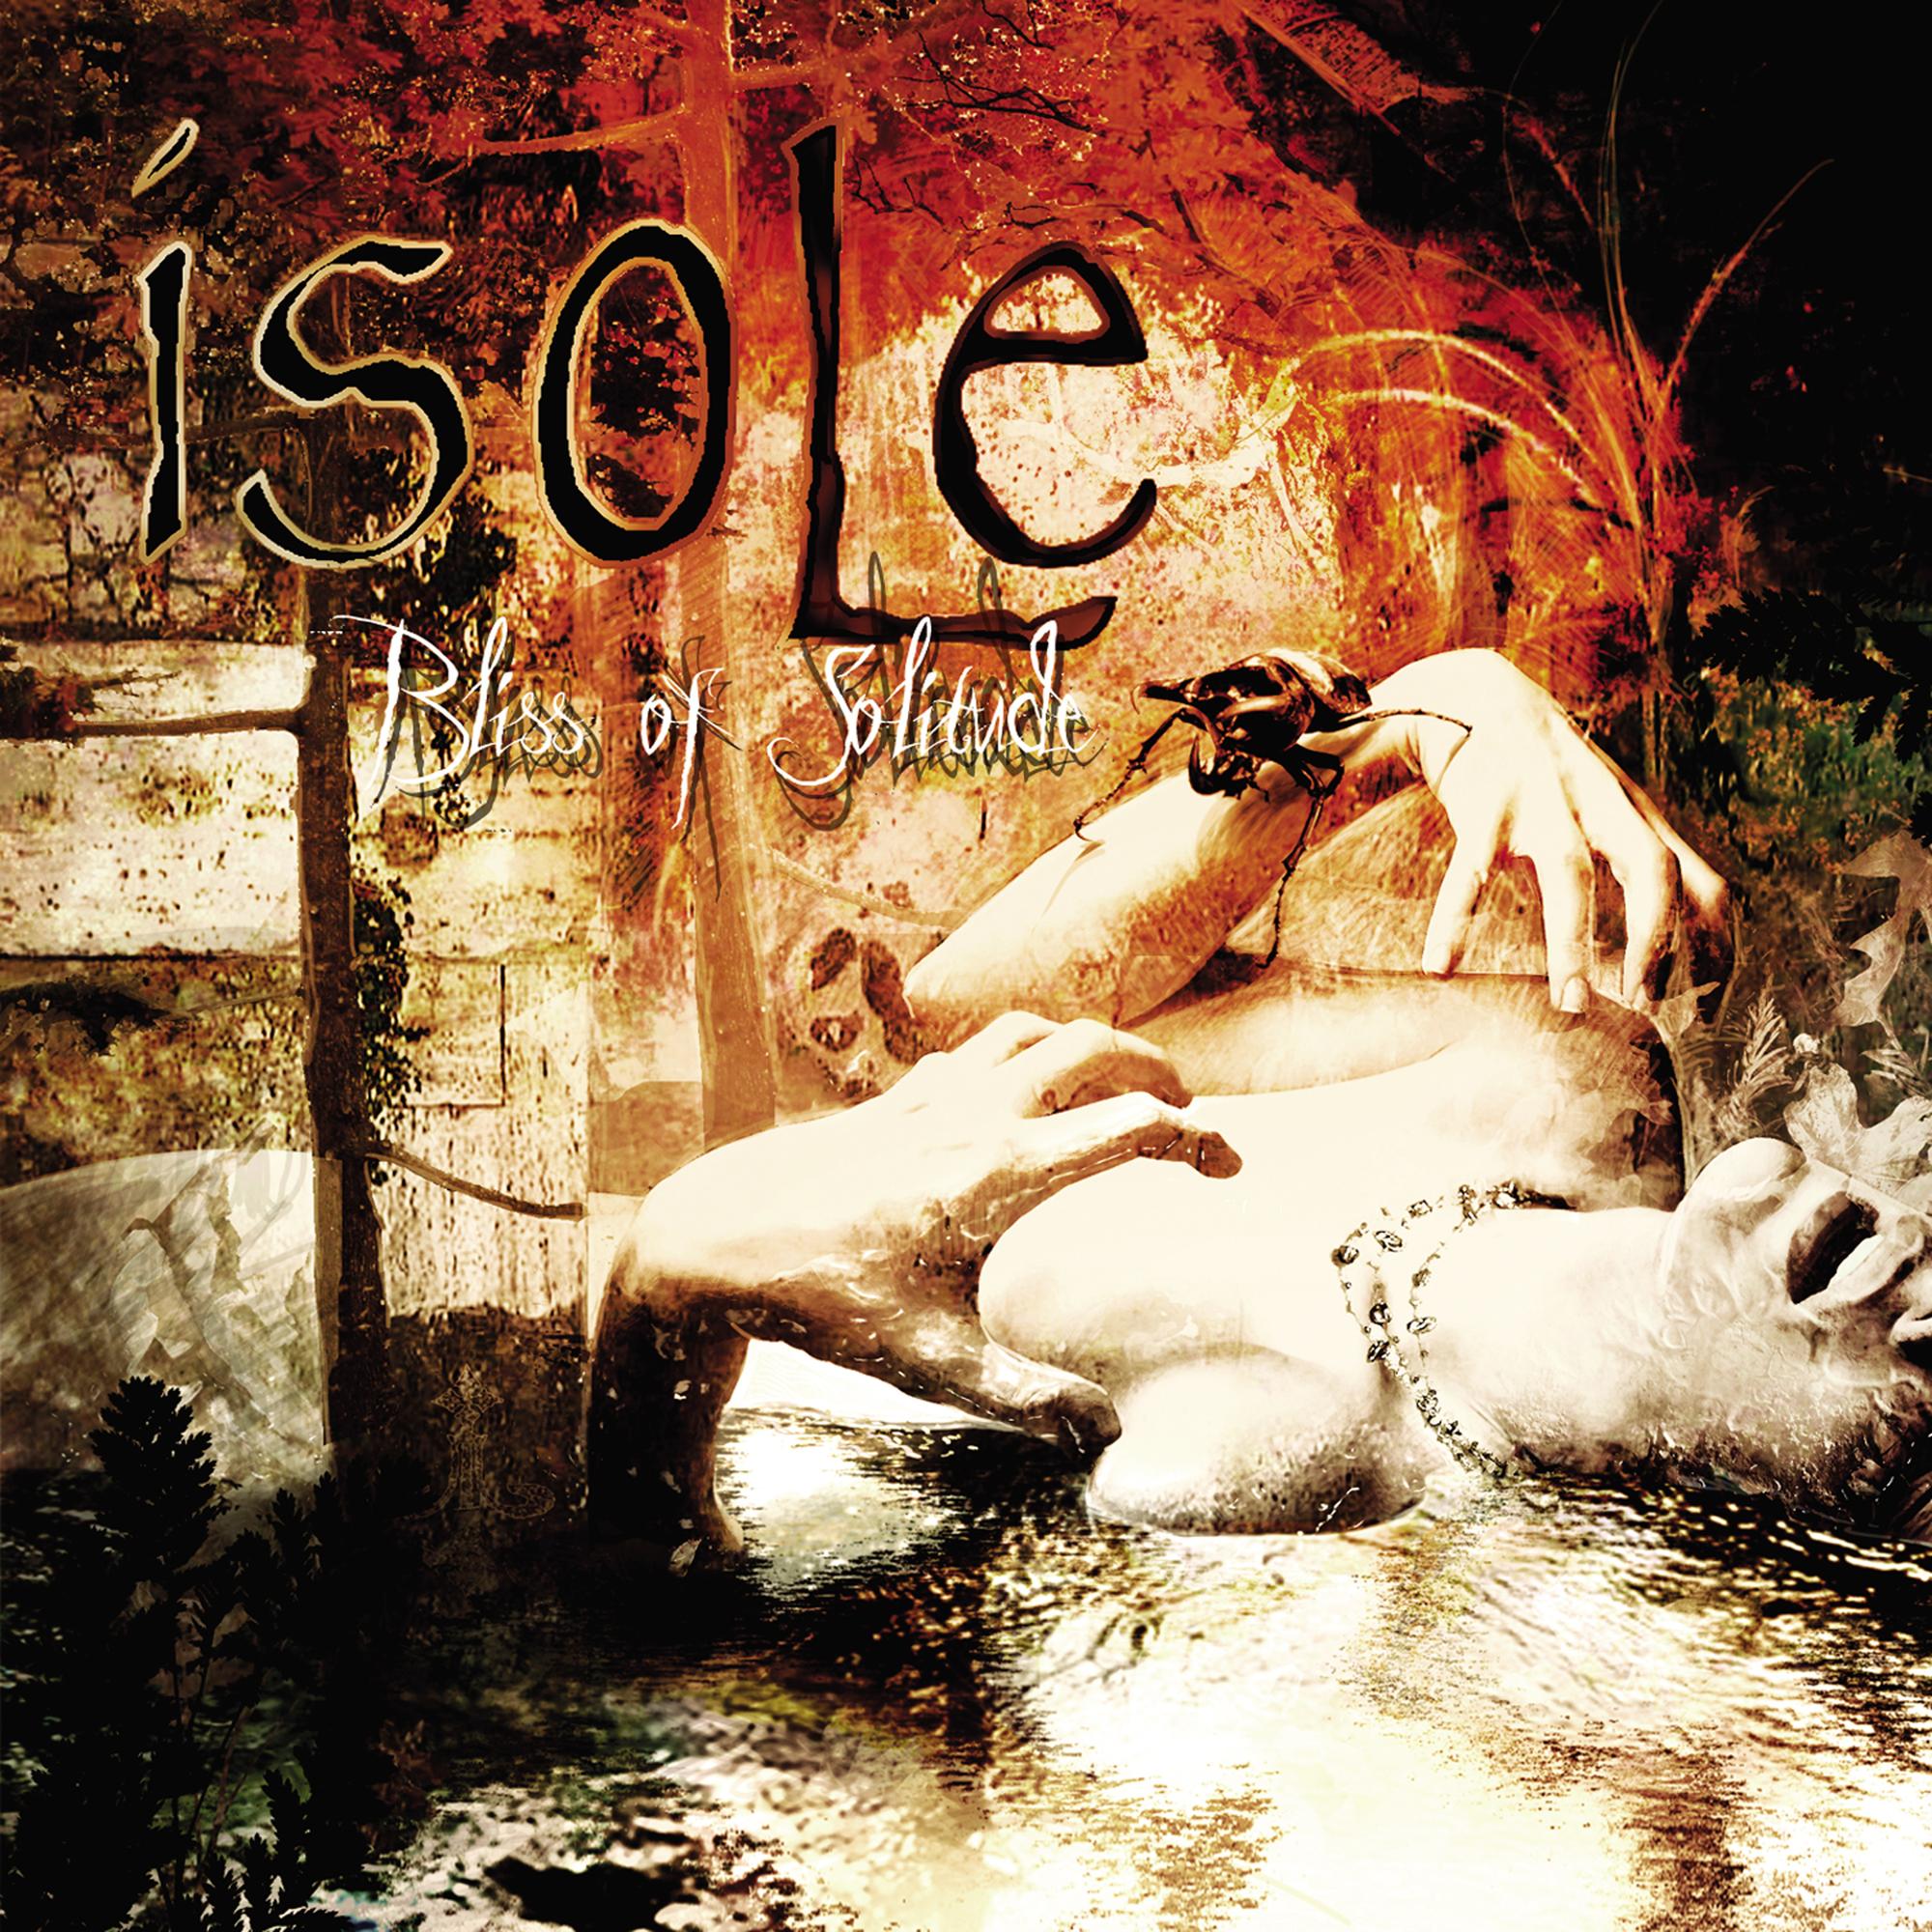 ISOLE - Bliss Of Solitude CD